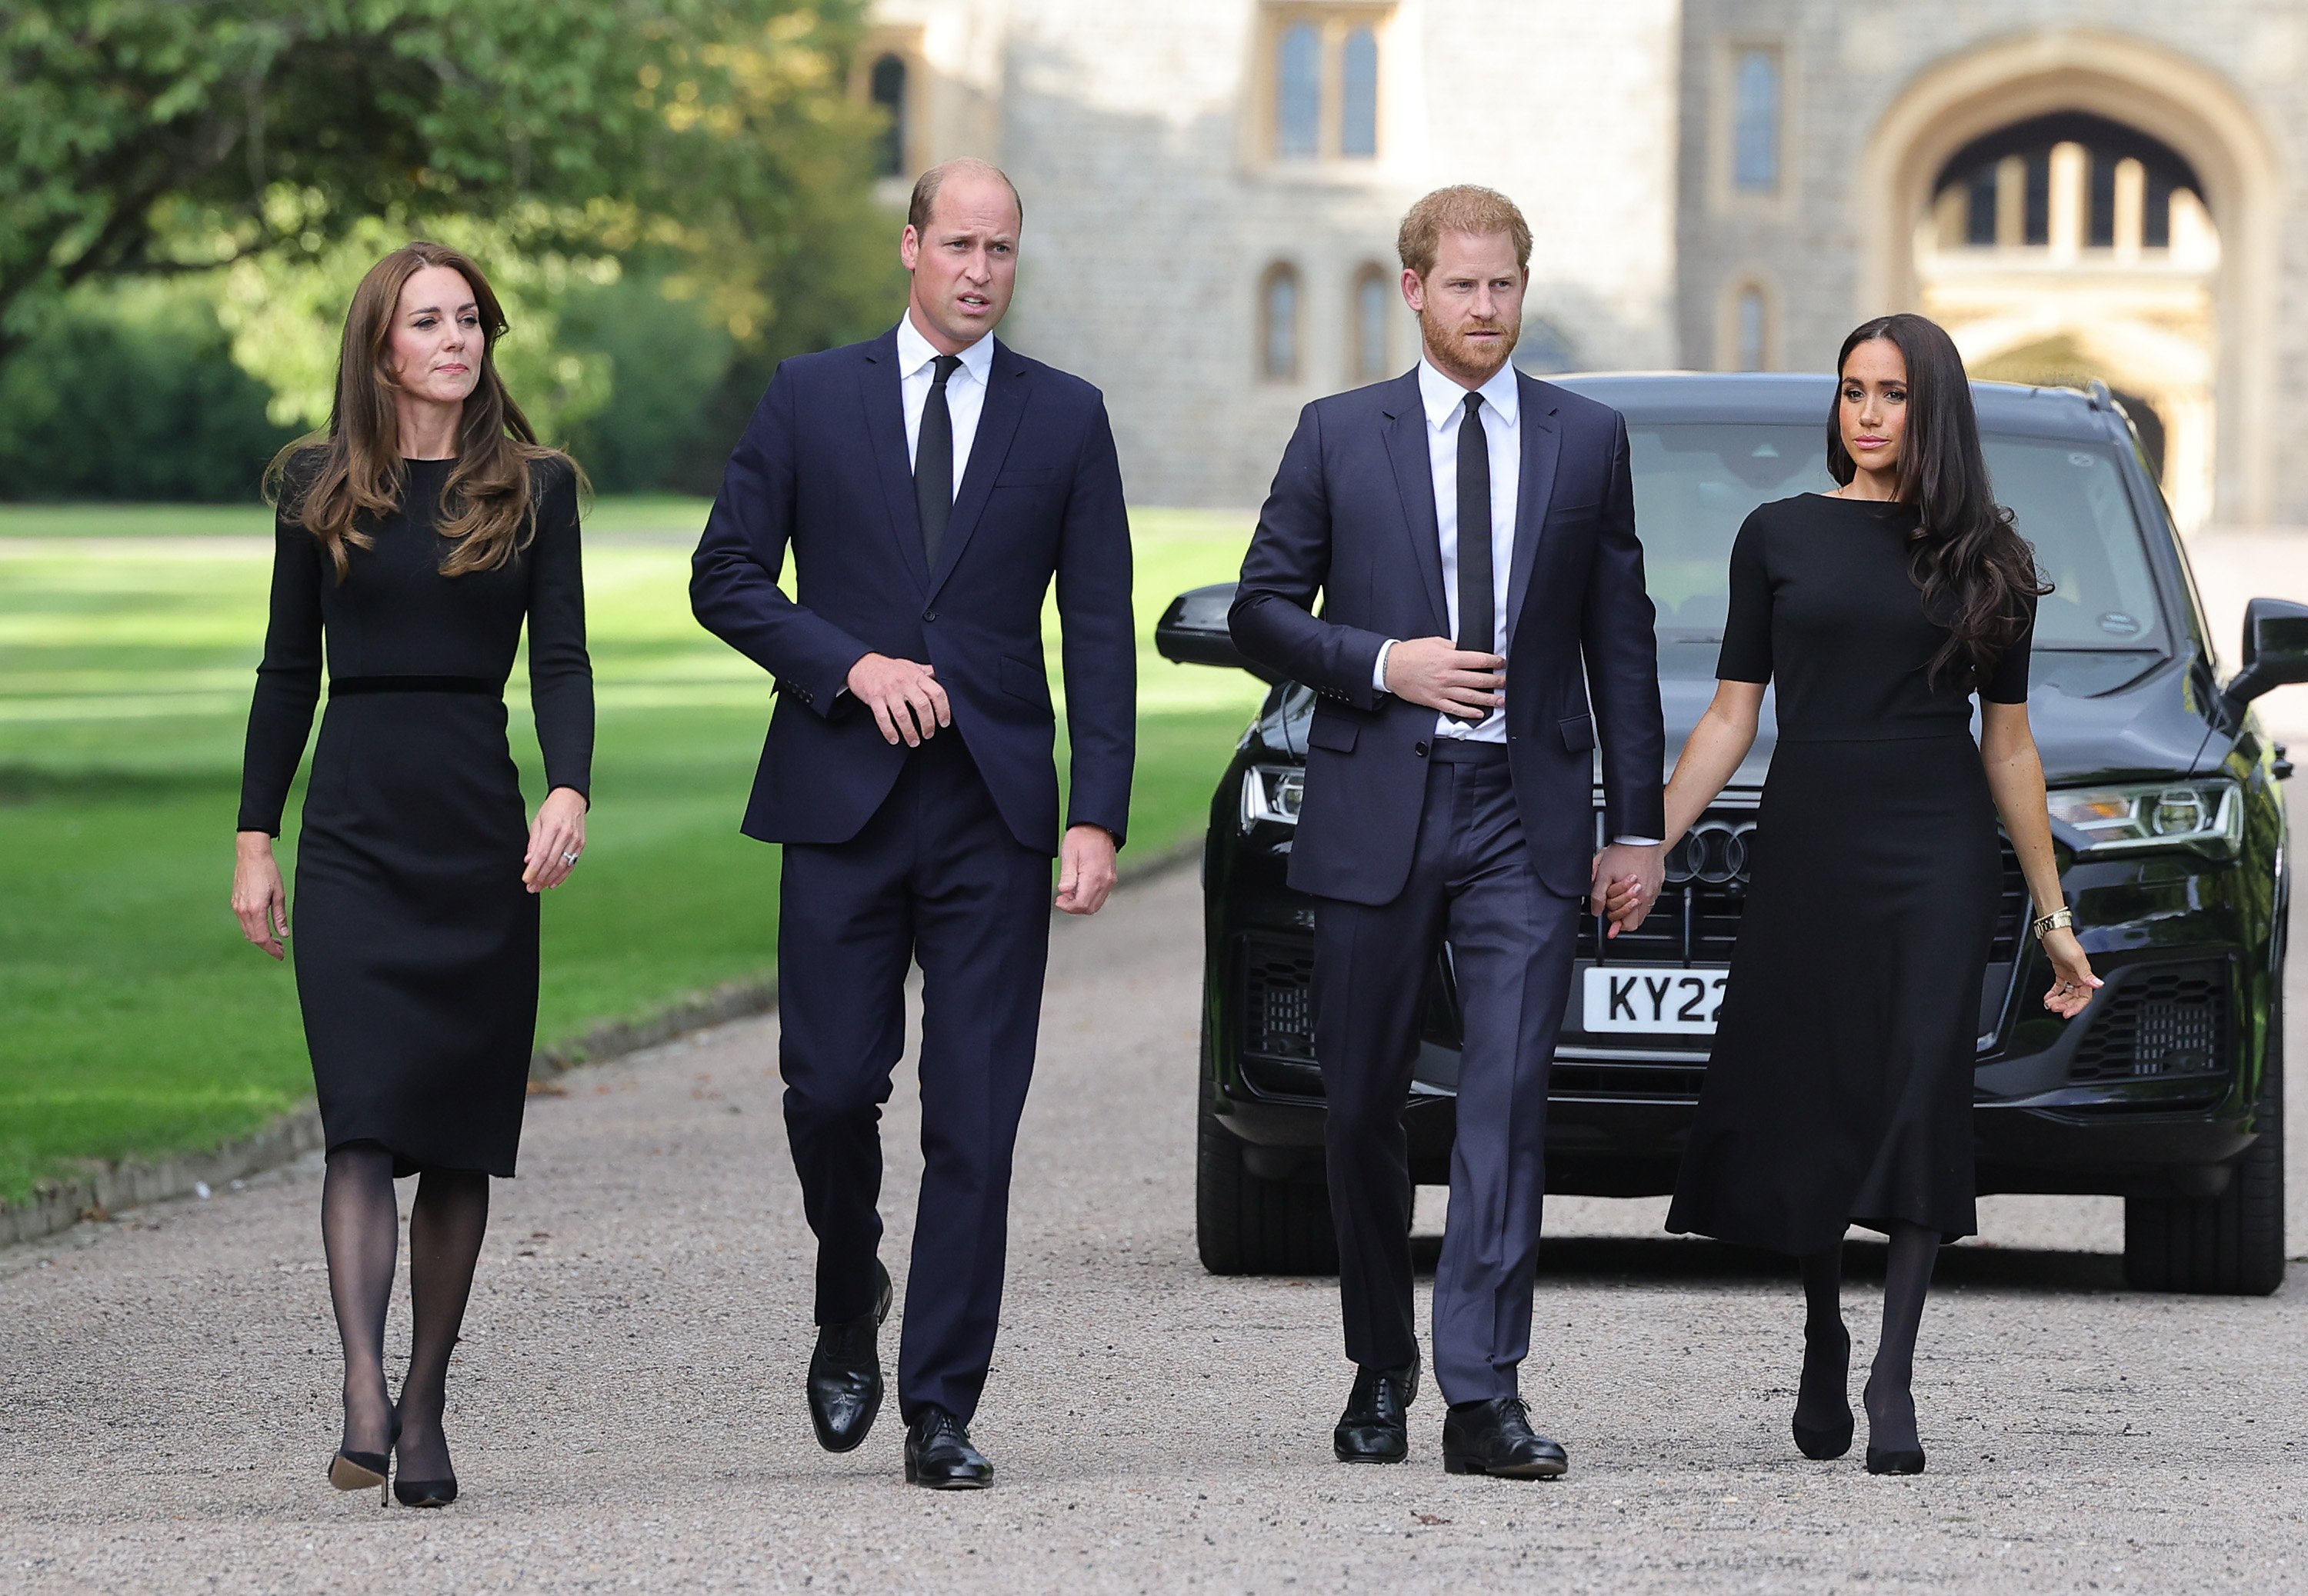 Prince Harry, Prince William, Kate Middleton and Meghan Markle in London 2022. | Source: Getty Images